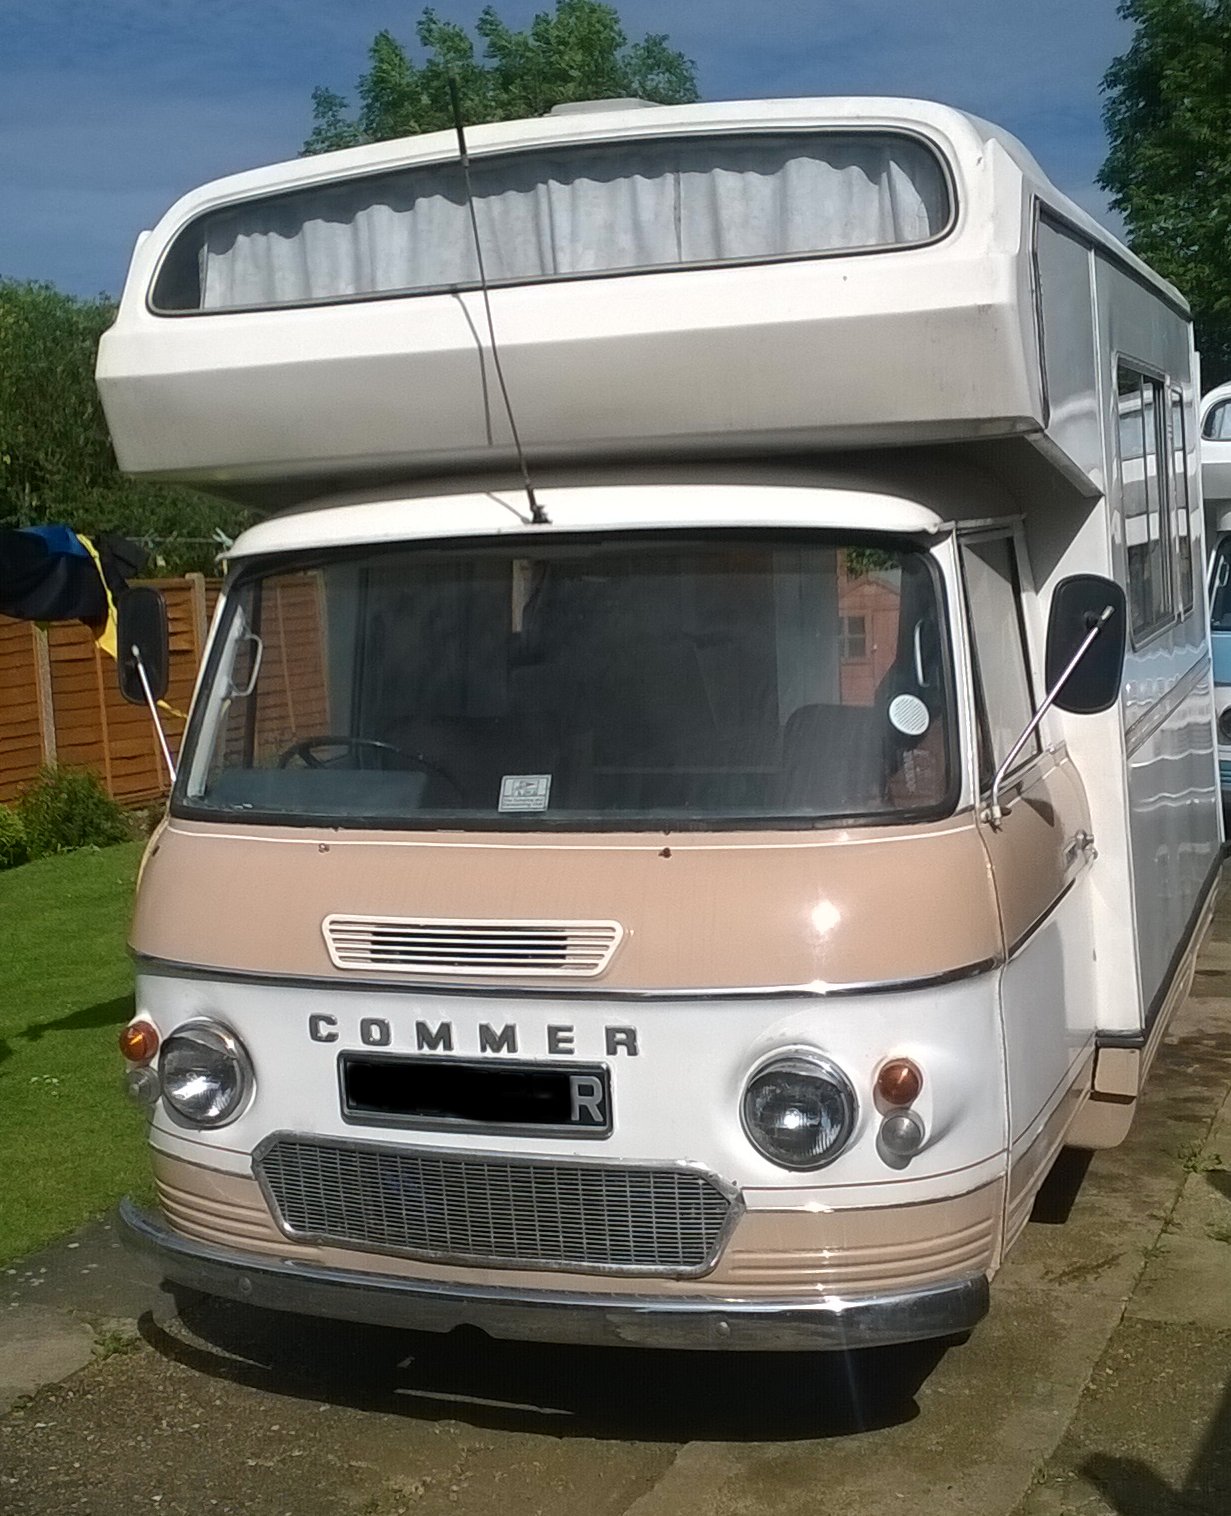 Campers for Sale, Classic Motorhomes